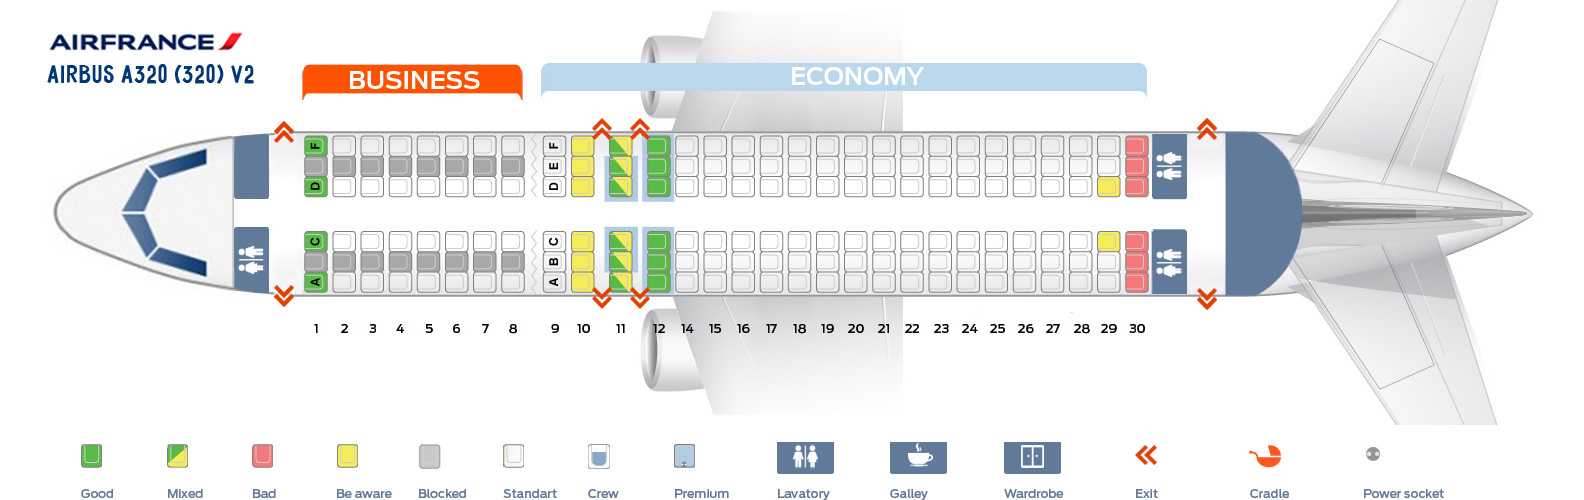 Seat Map Airbus A320-200 V2 AirFrance